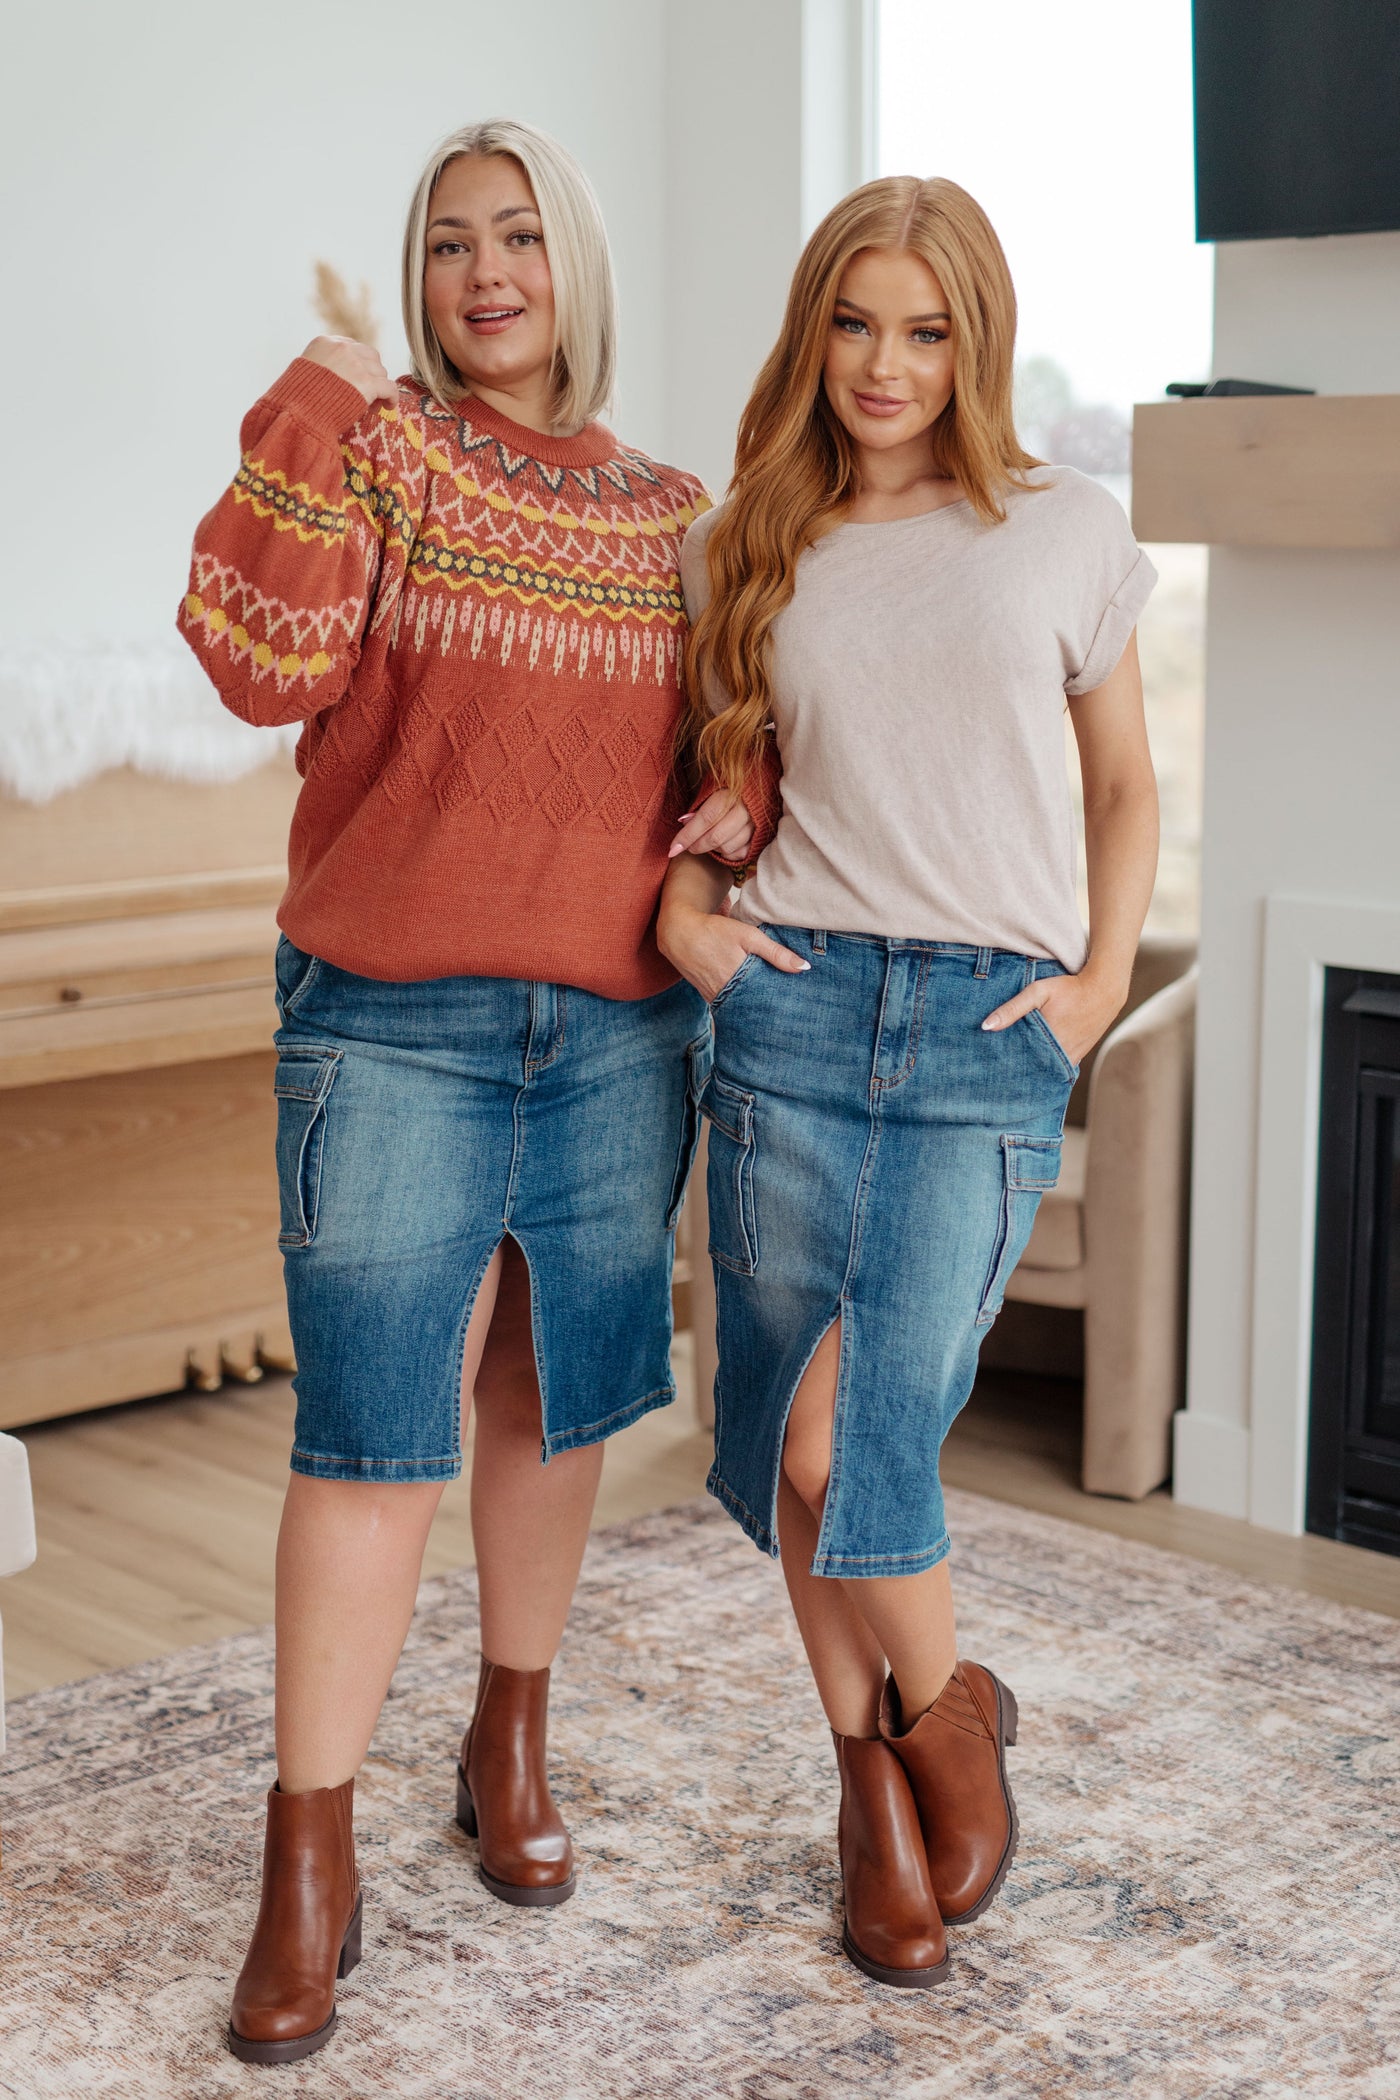 It's crafted with stretchy medium wash denim for a comfortable fit and extra movement, and features a front slit and cargo pockets for a more dynamic look. Look great and put your most fashionable foot forward